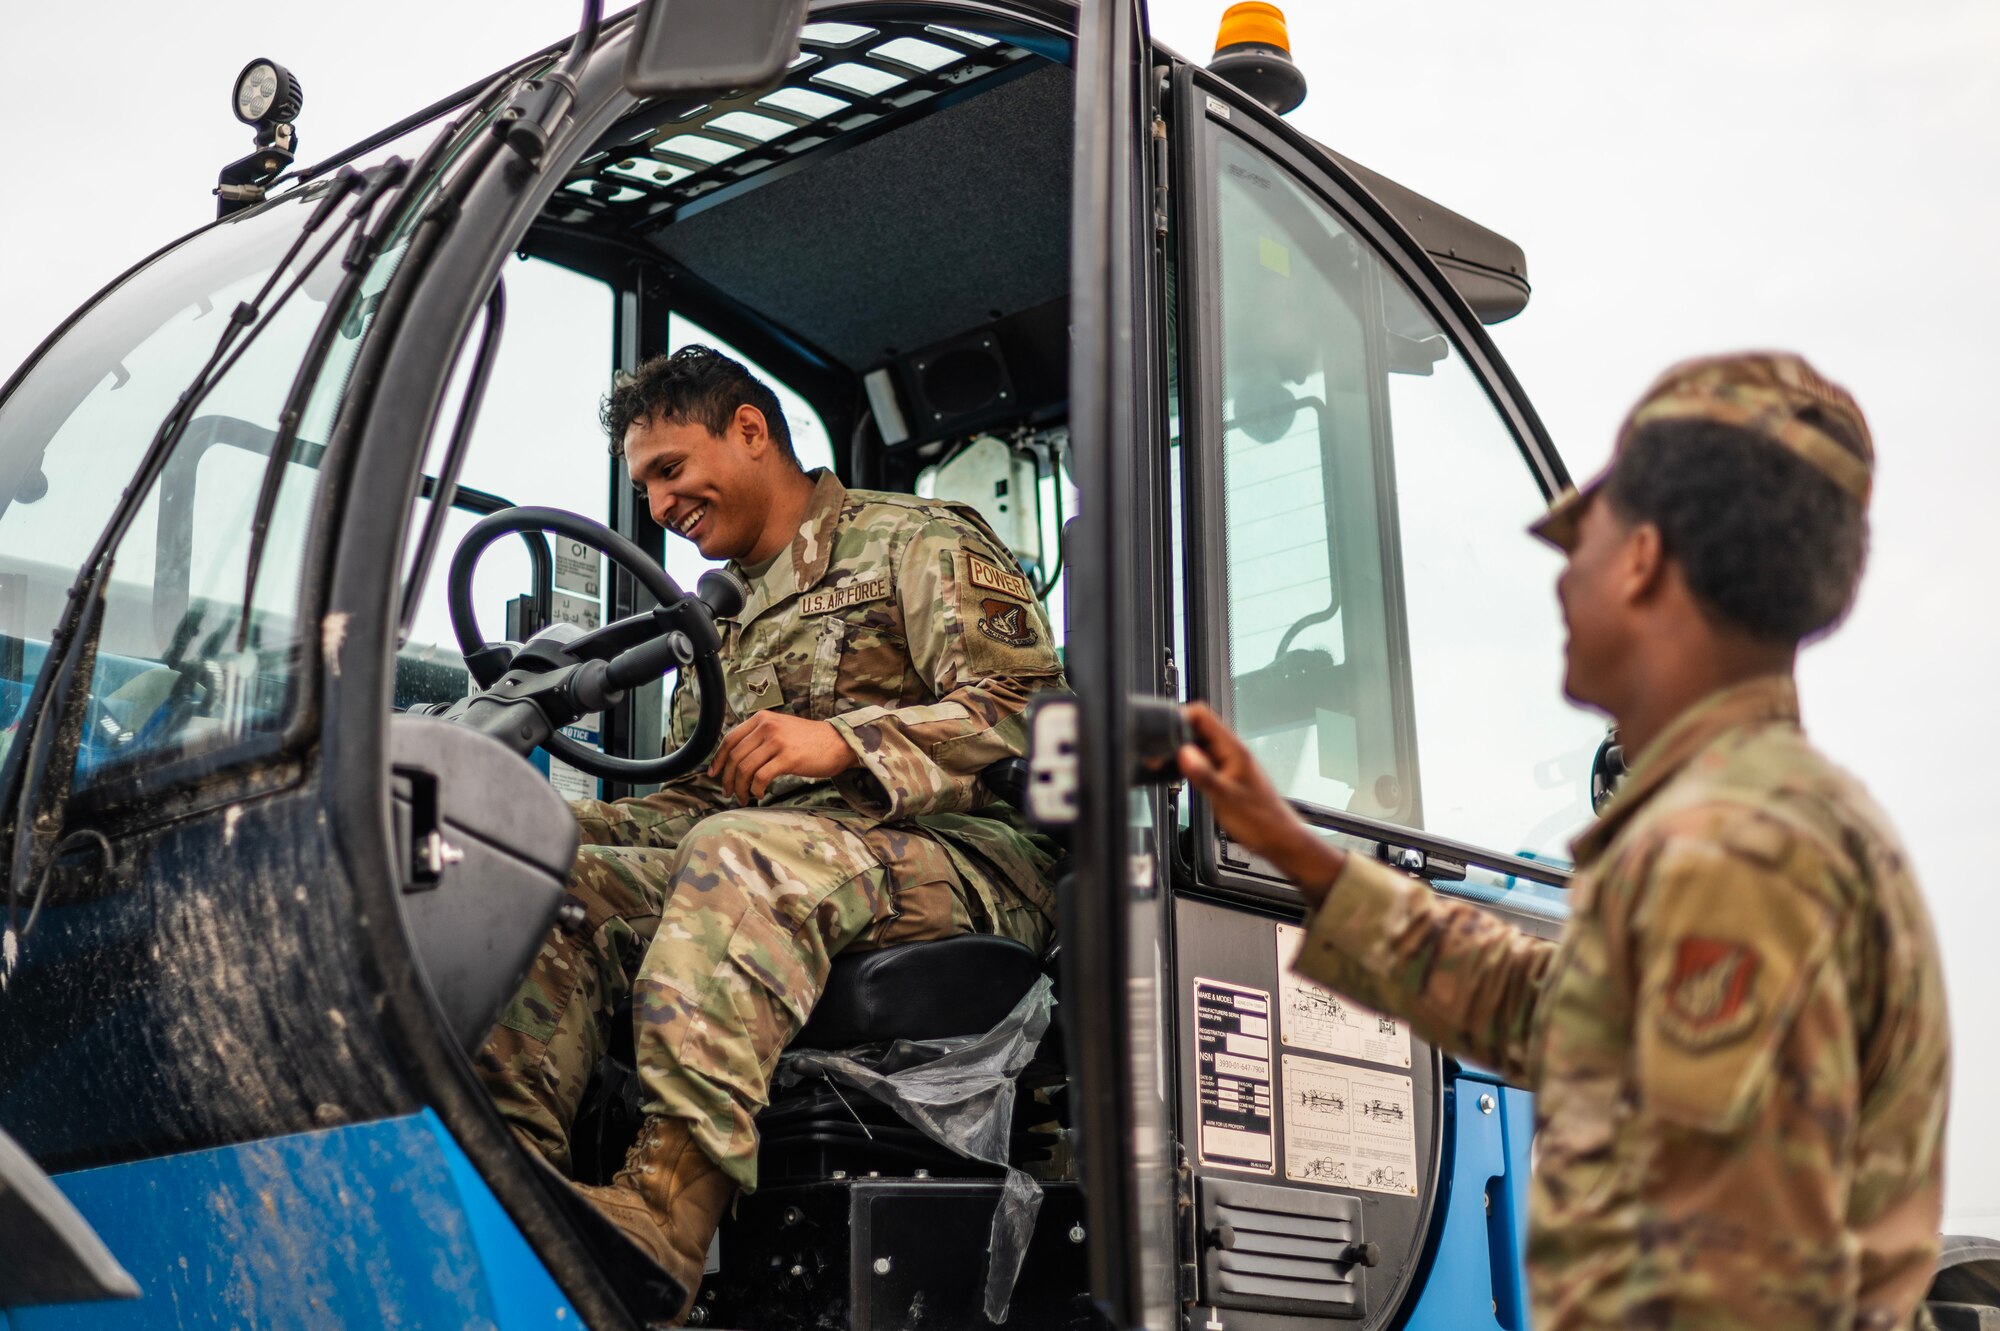 Airman instructs another Airman on procedures to operate a telehandler during a Prime Base Engineer Emergency Force or “Prime BEEF” training at Kunsan Air Base.